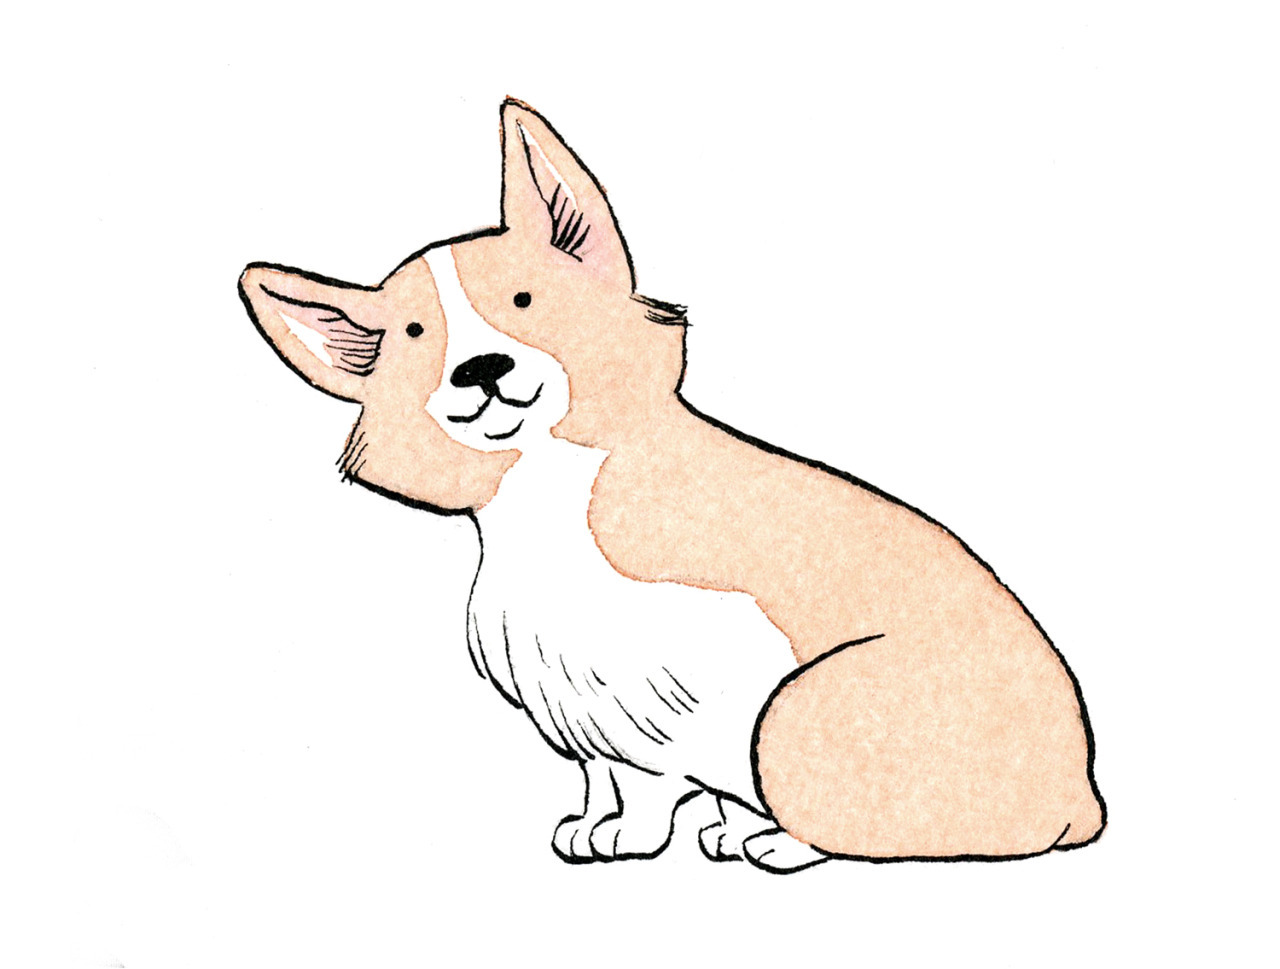 Sketchbook: A Cute Corgi Sketchbook|Perfect for Drawing, Writing, Sketching  and Doodling|8.5x11|120 Pages|White Paper